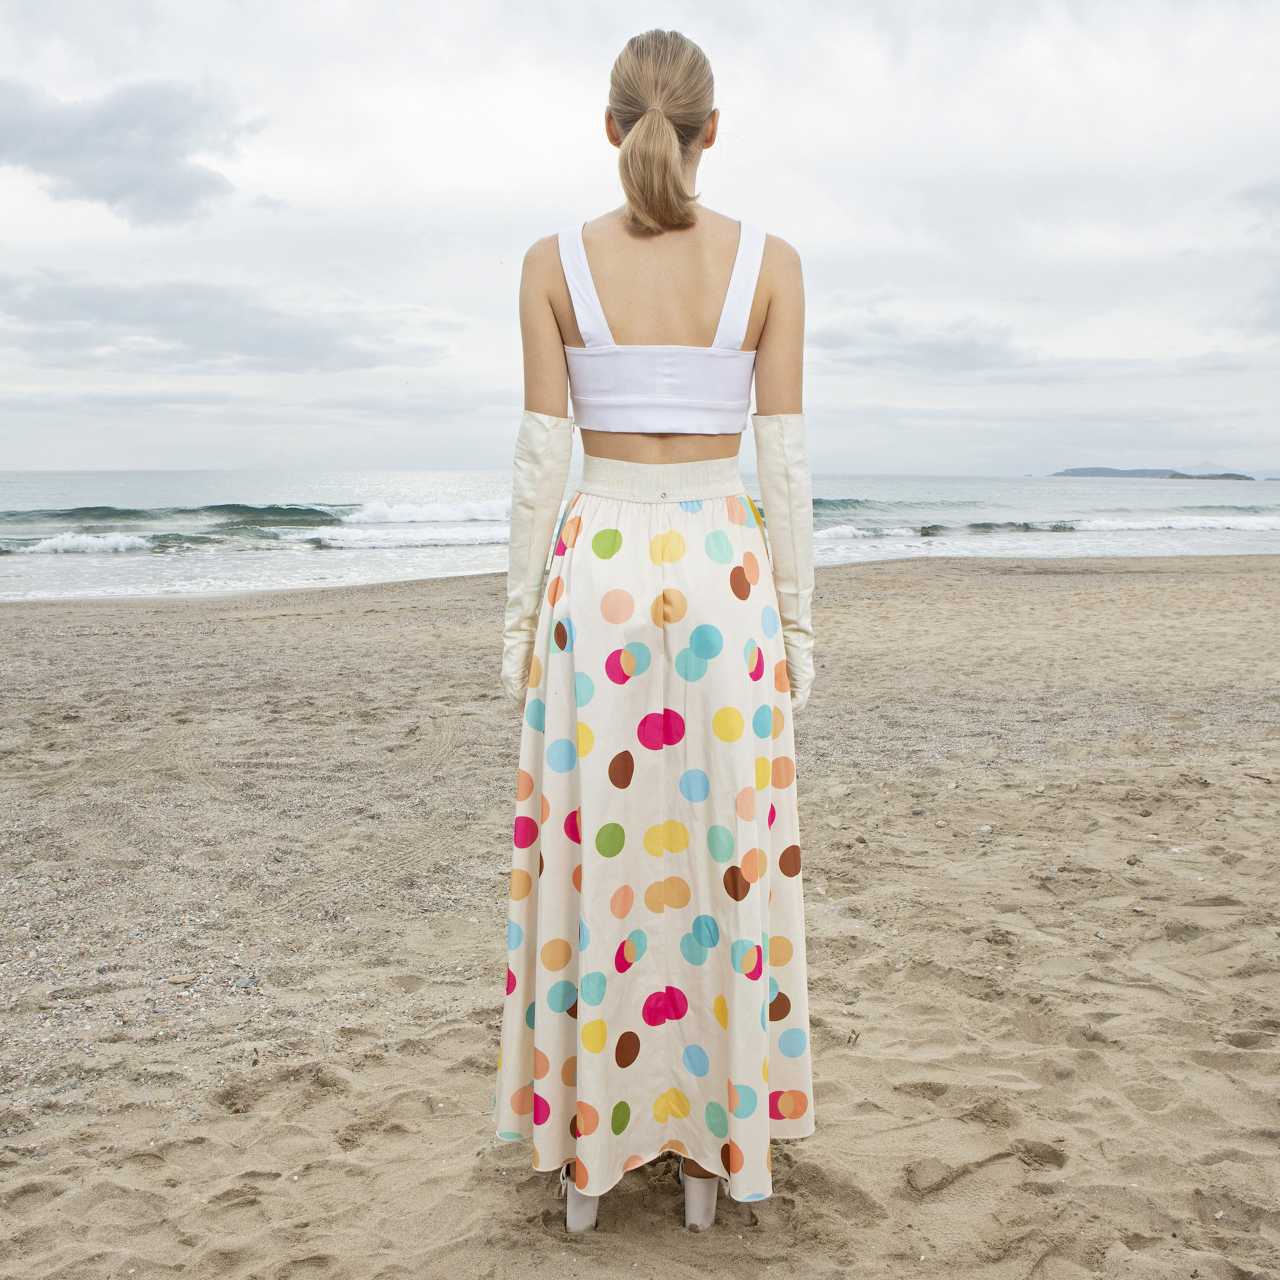 Product preview: Tulle Tutu Skirt Maxi Ivory Multicolor Dotted Skirt